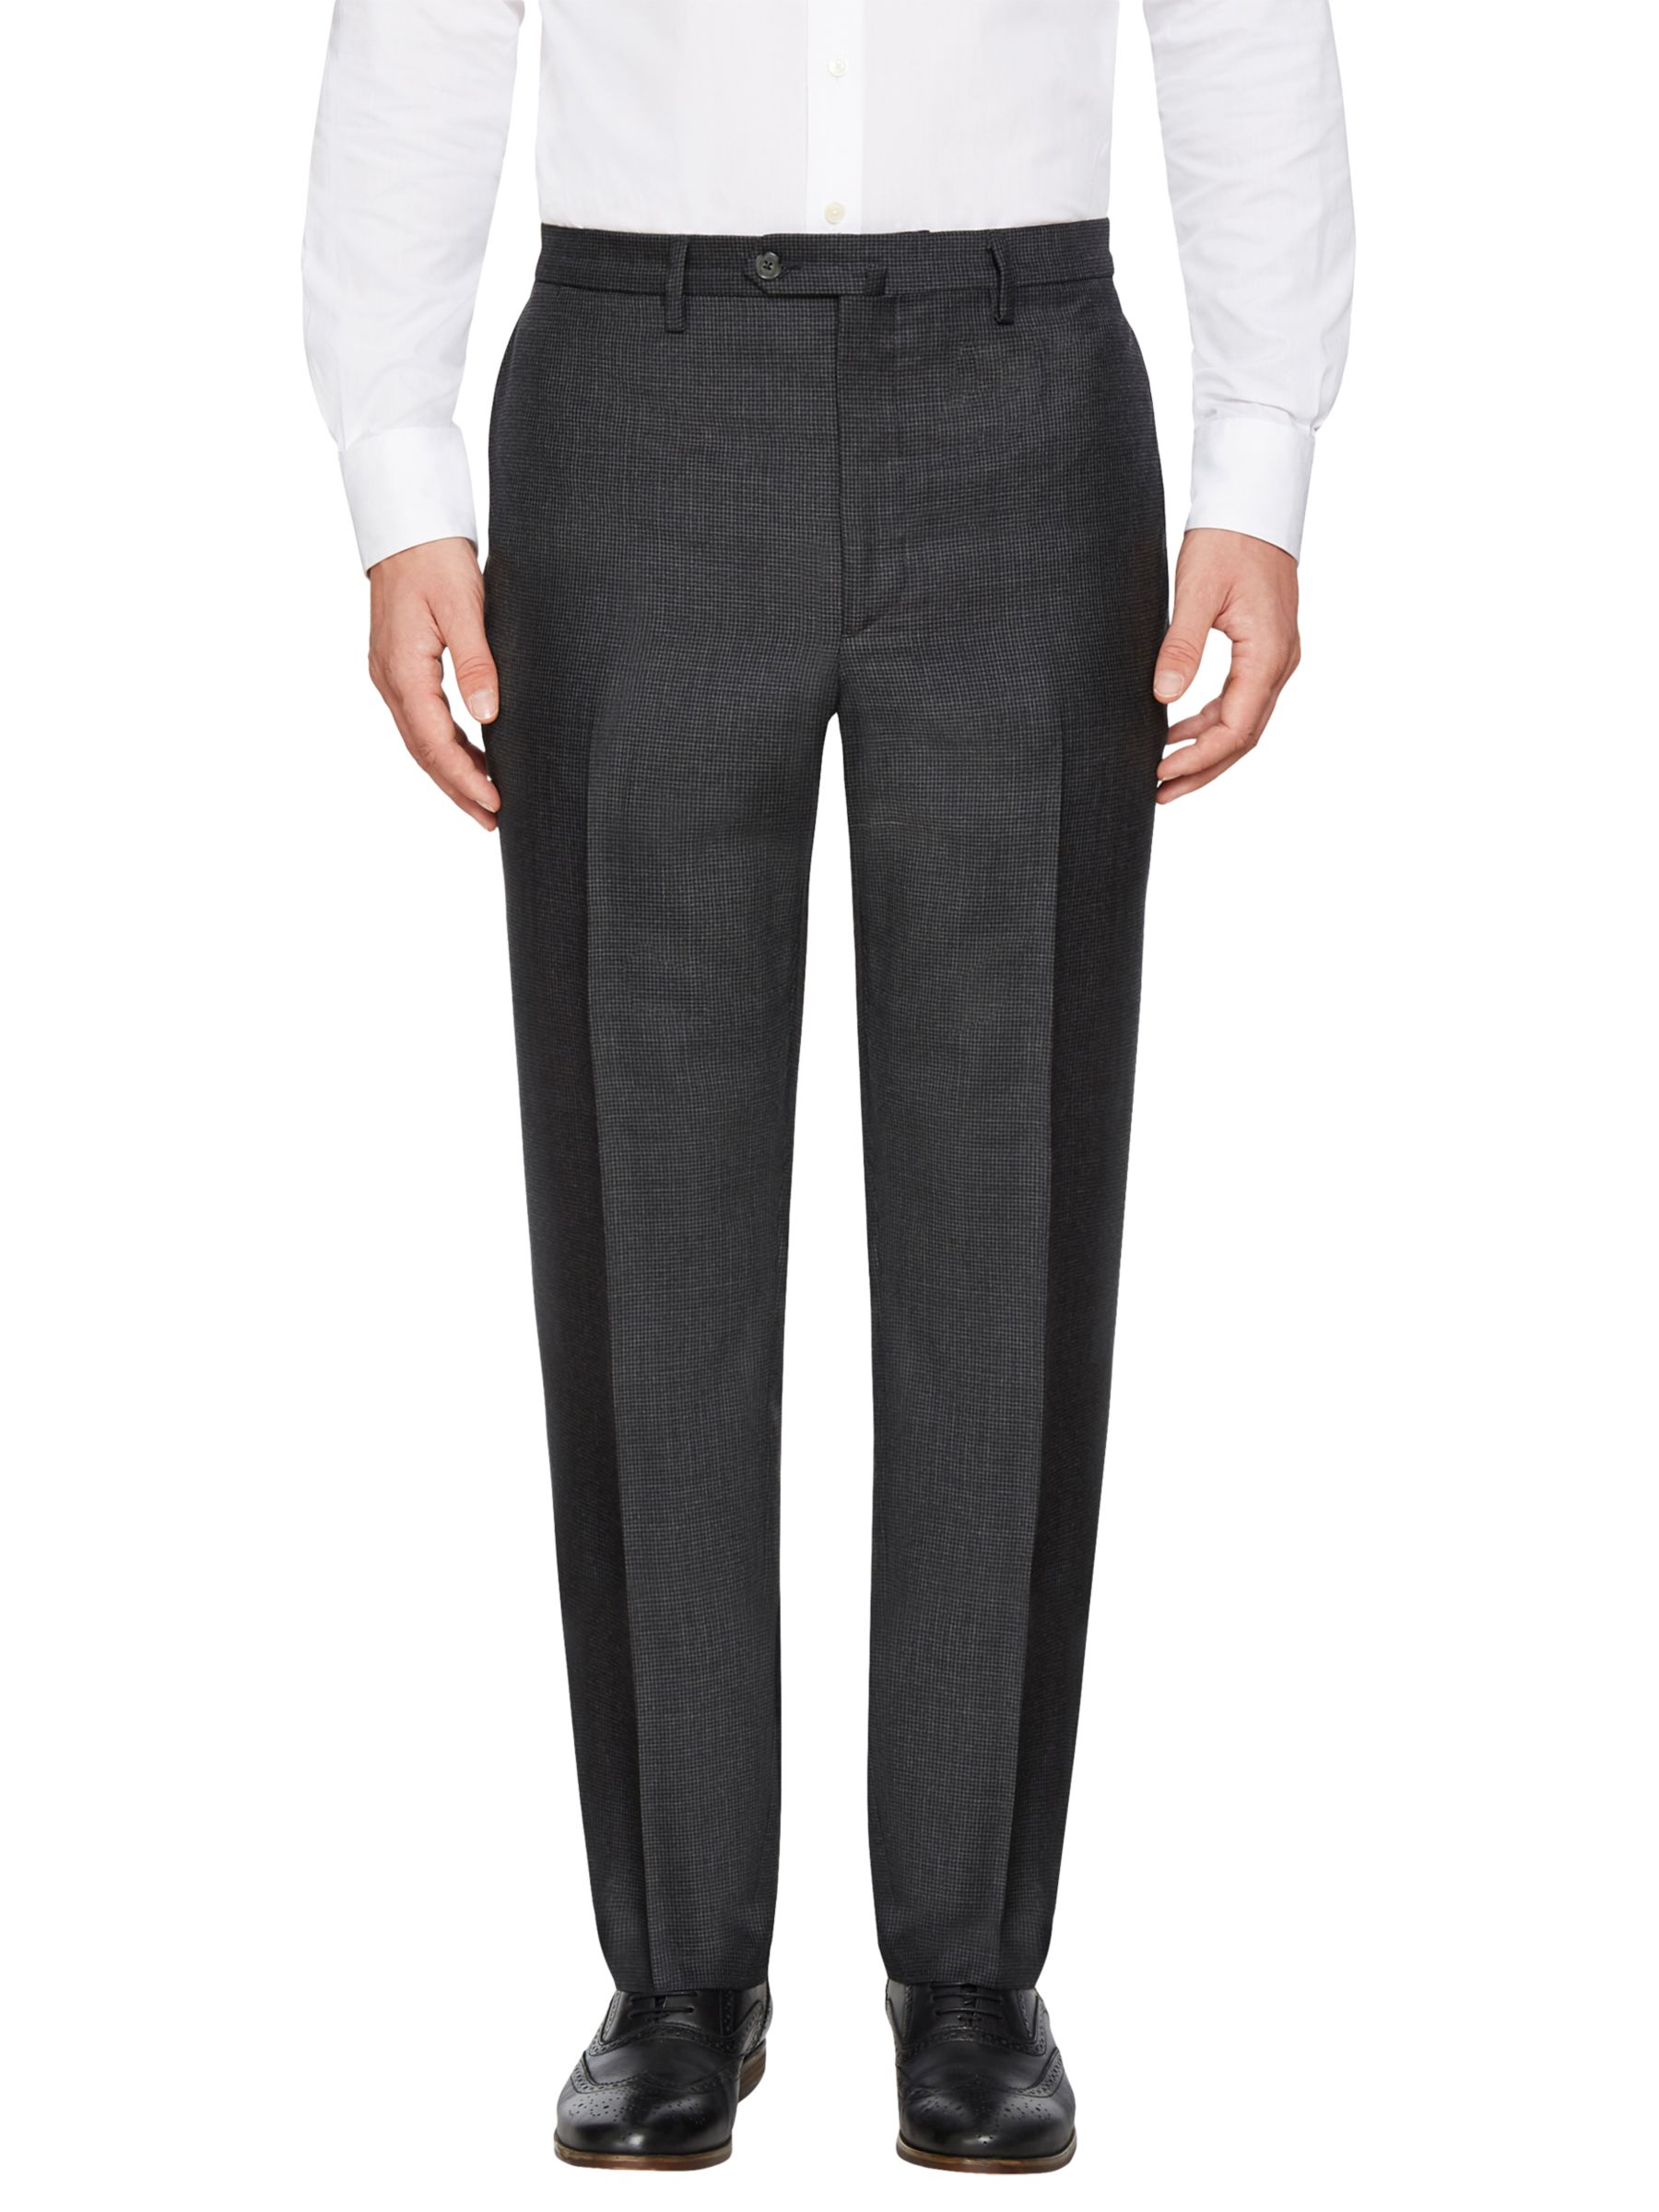 Hackett London Wool Puppytooth Regular Fit Suit Trousers, Charcoal, 40R